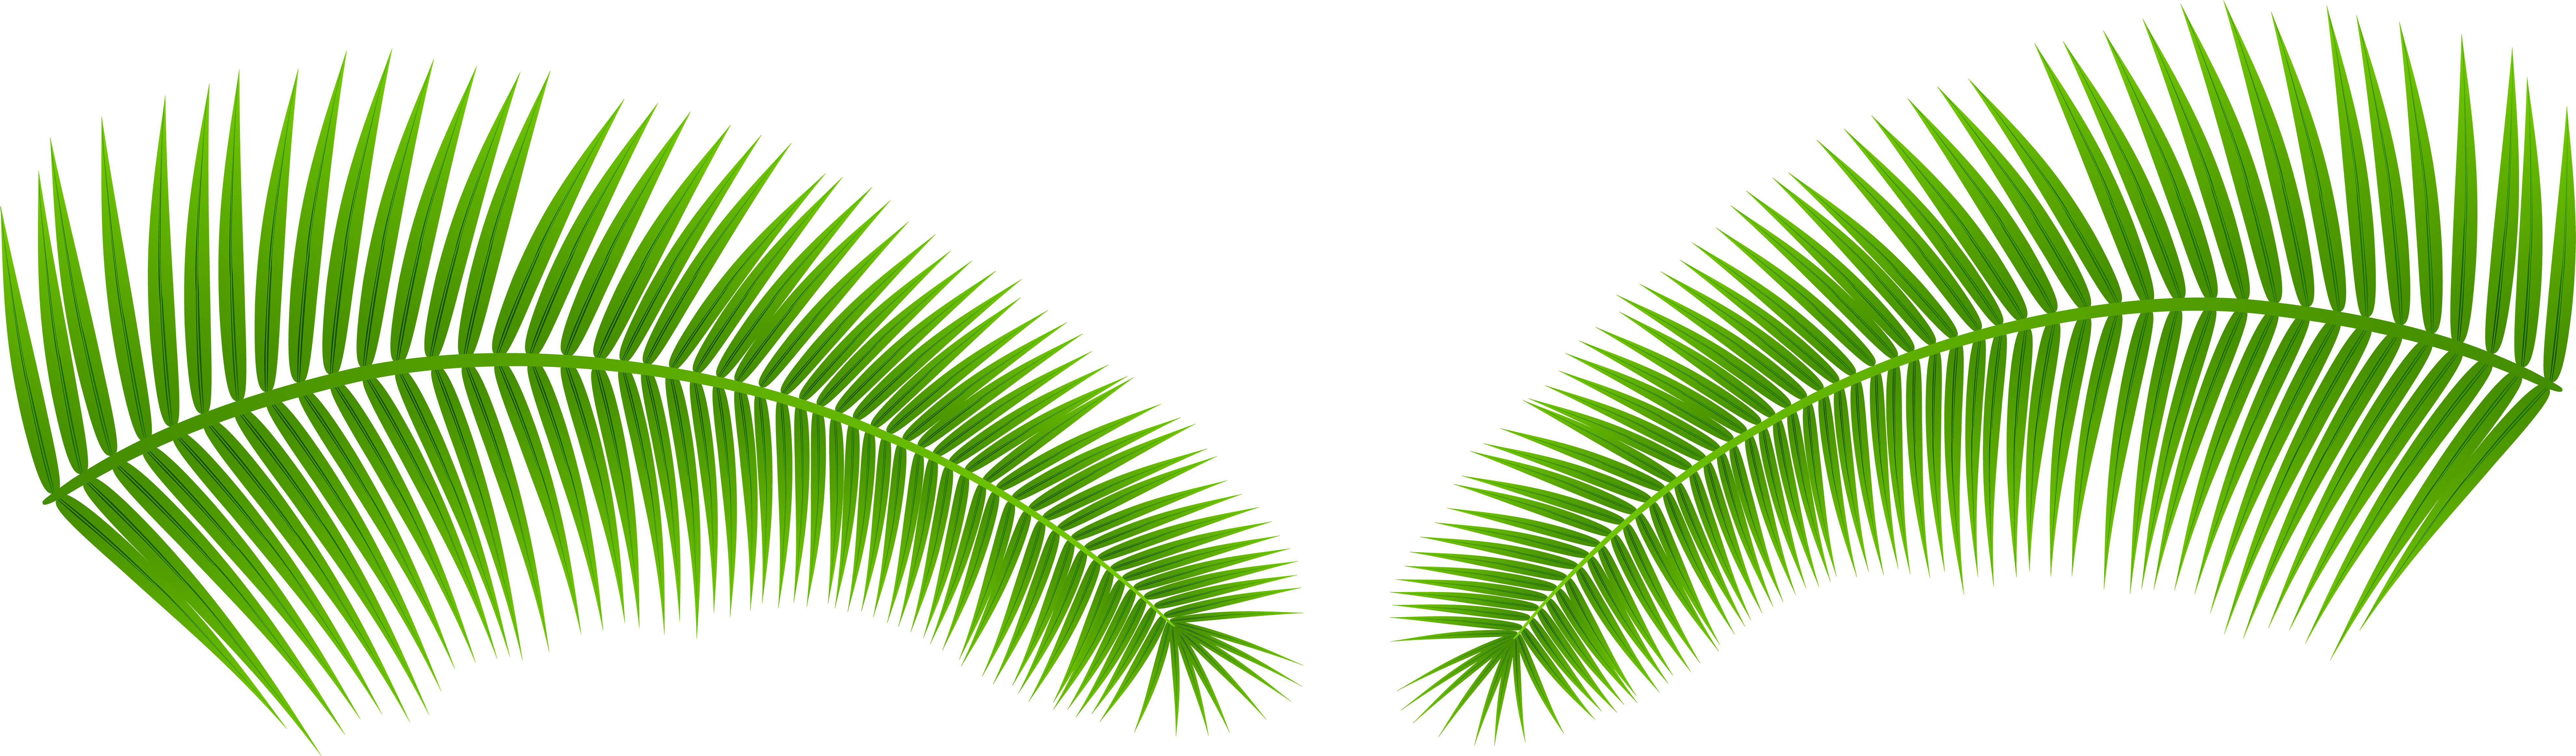 A Pair Of Green Leaves